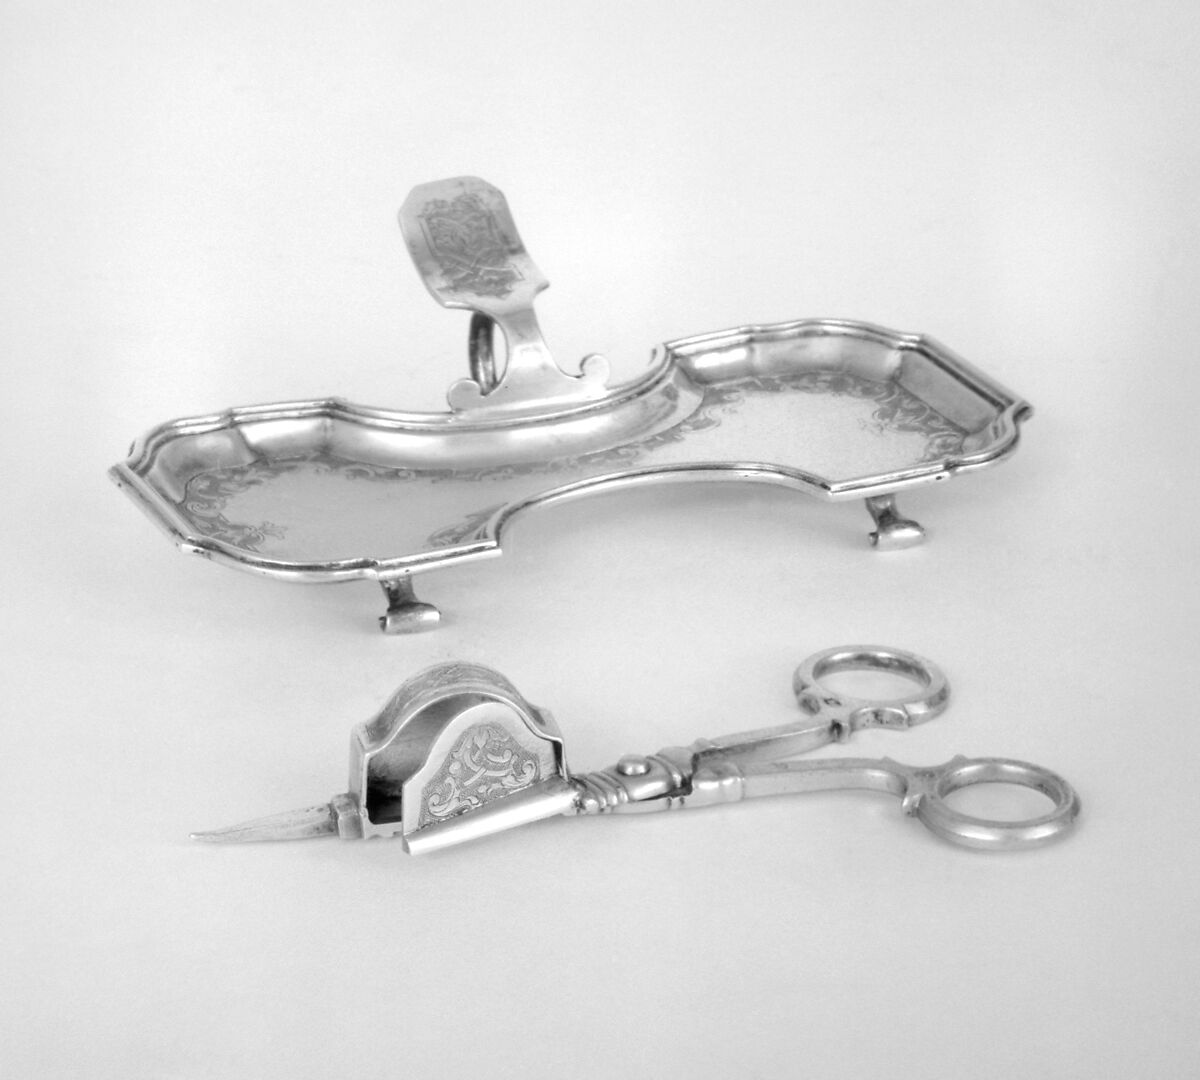 Snuffers (part of a set), Silver gilt, German, Augsburg 